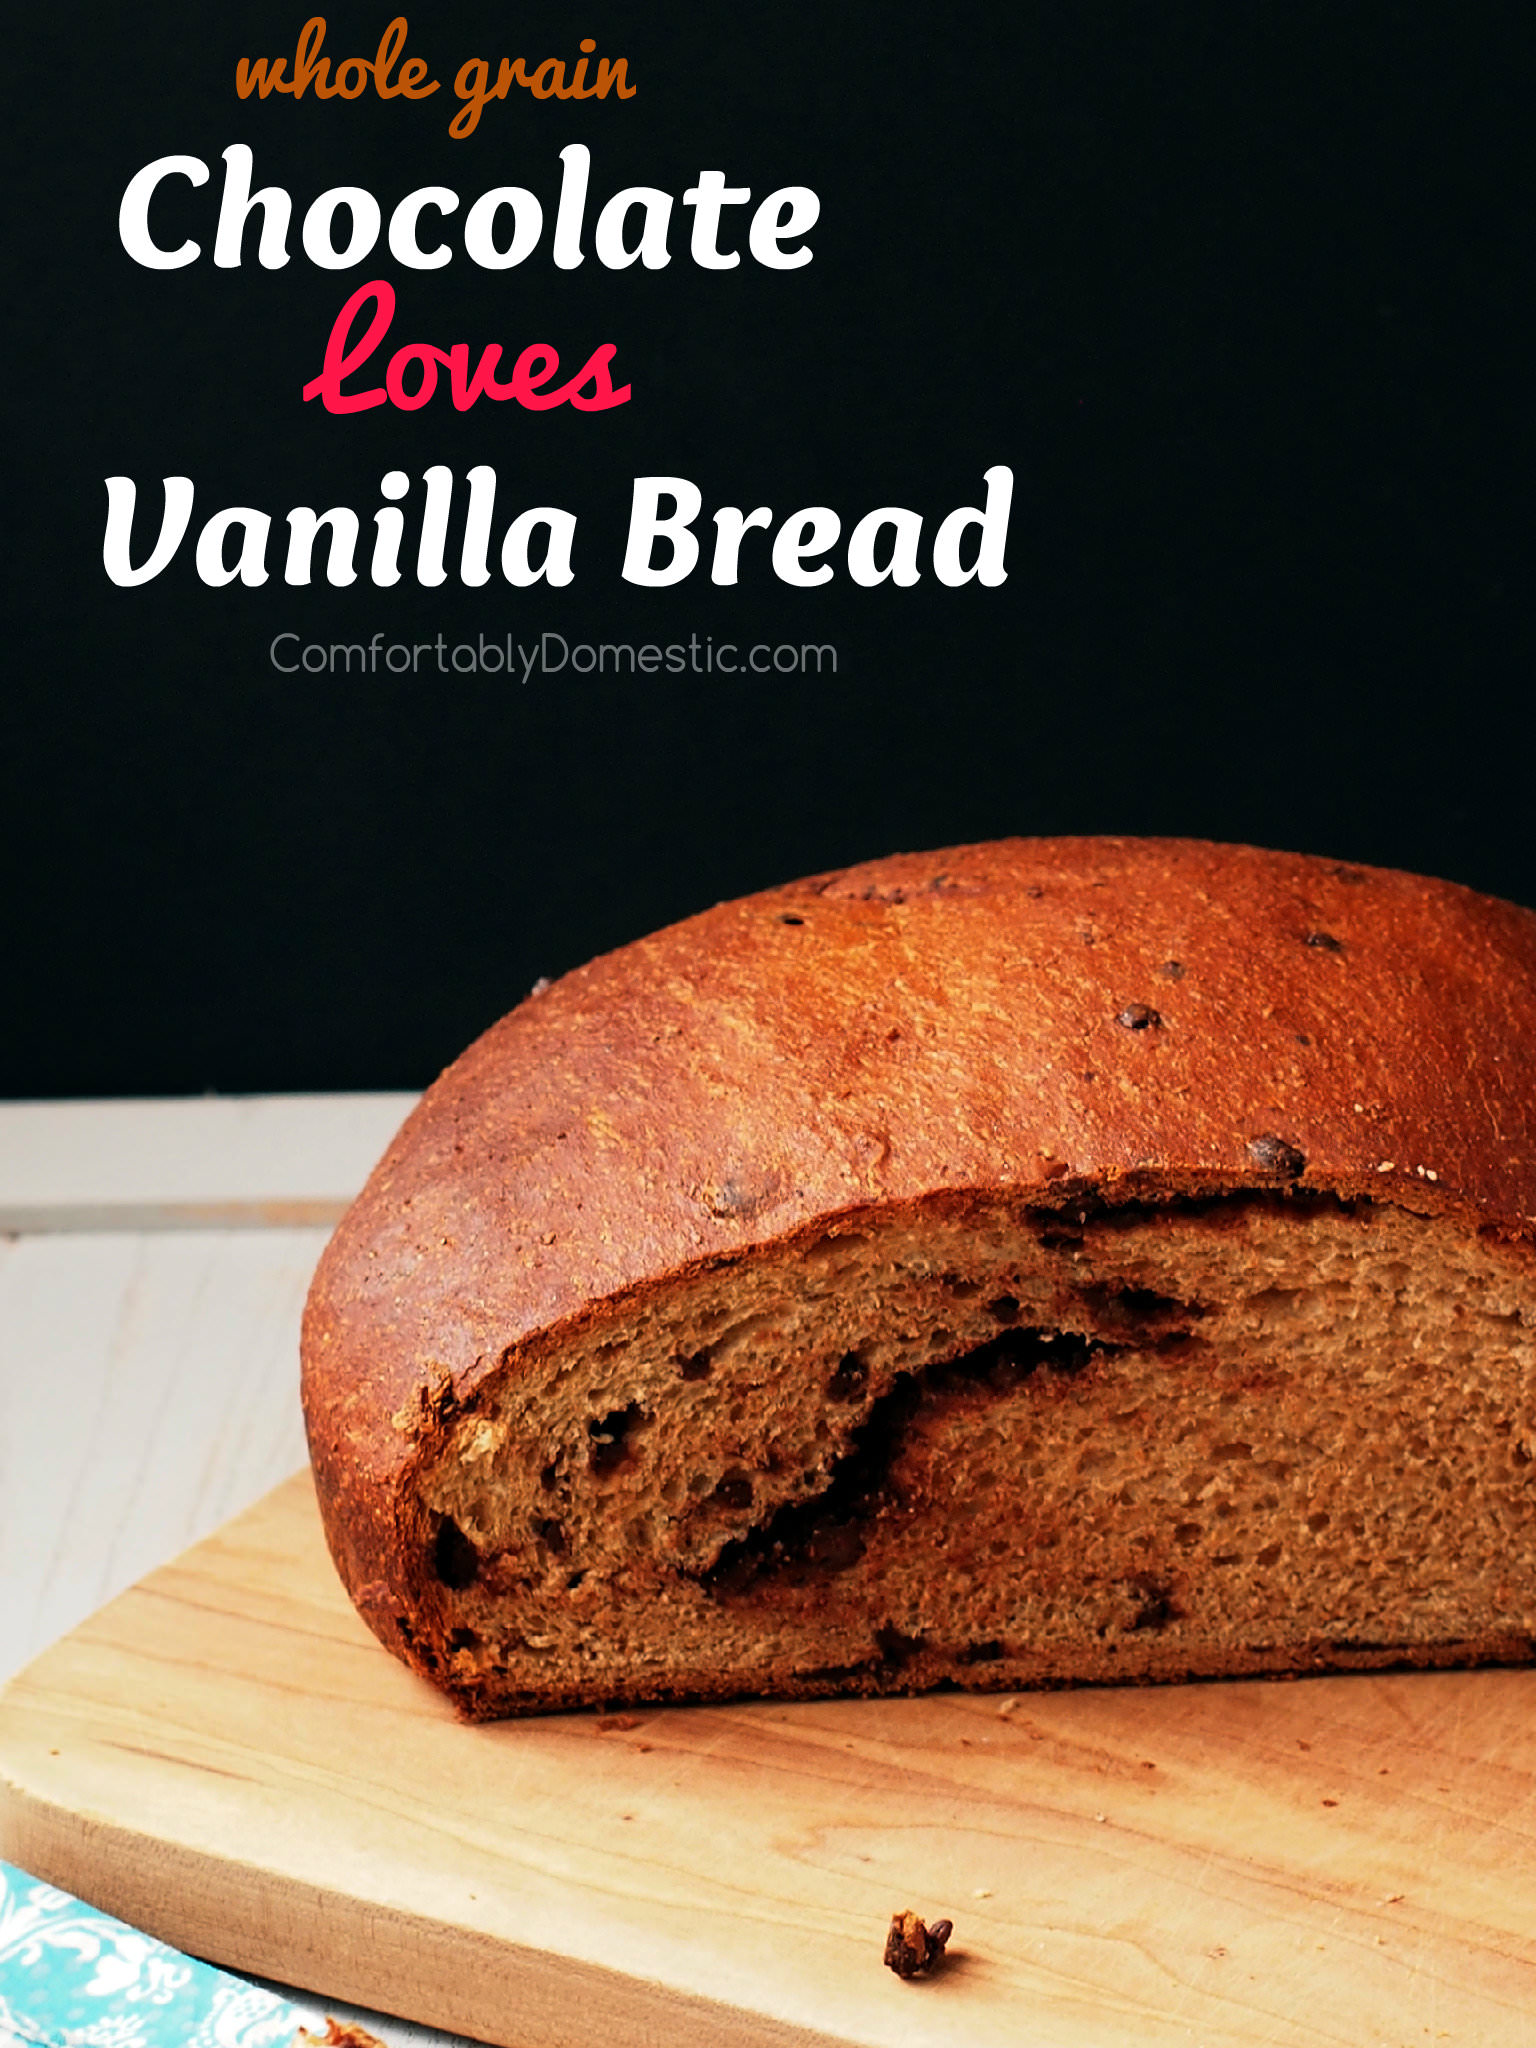 Chocolate loves vanilla, especially in this sweet bread! Sweet, vanilla-infused whole grain sweet dough with a generous helping of chopped chocolate kneaded into tender loaves. | ComfortablyDomestic.com